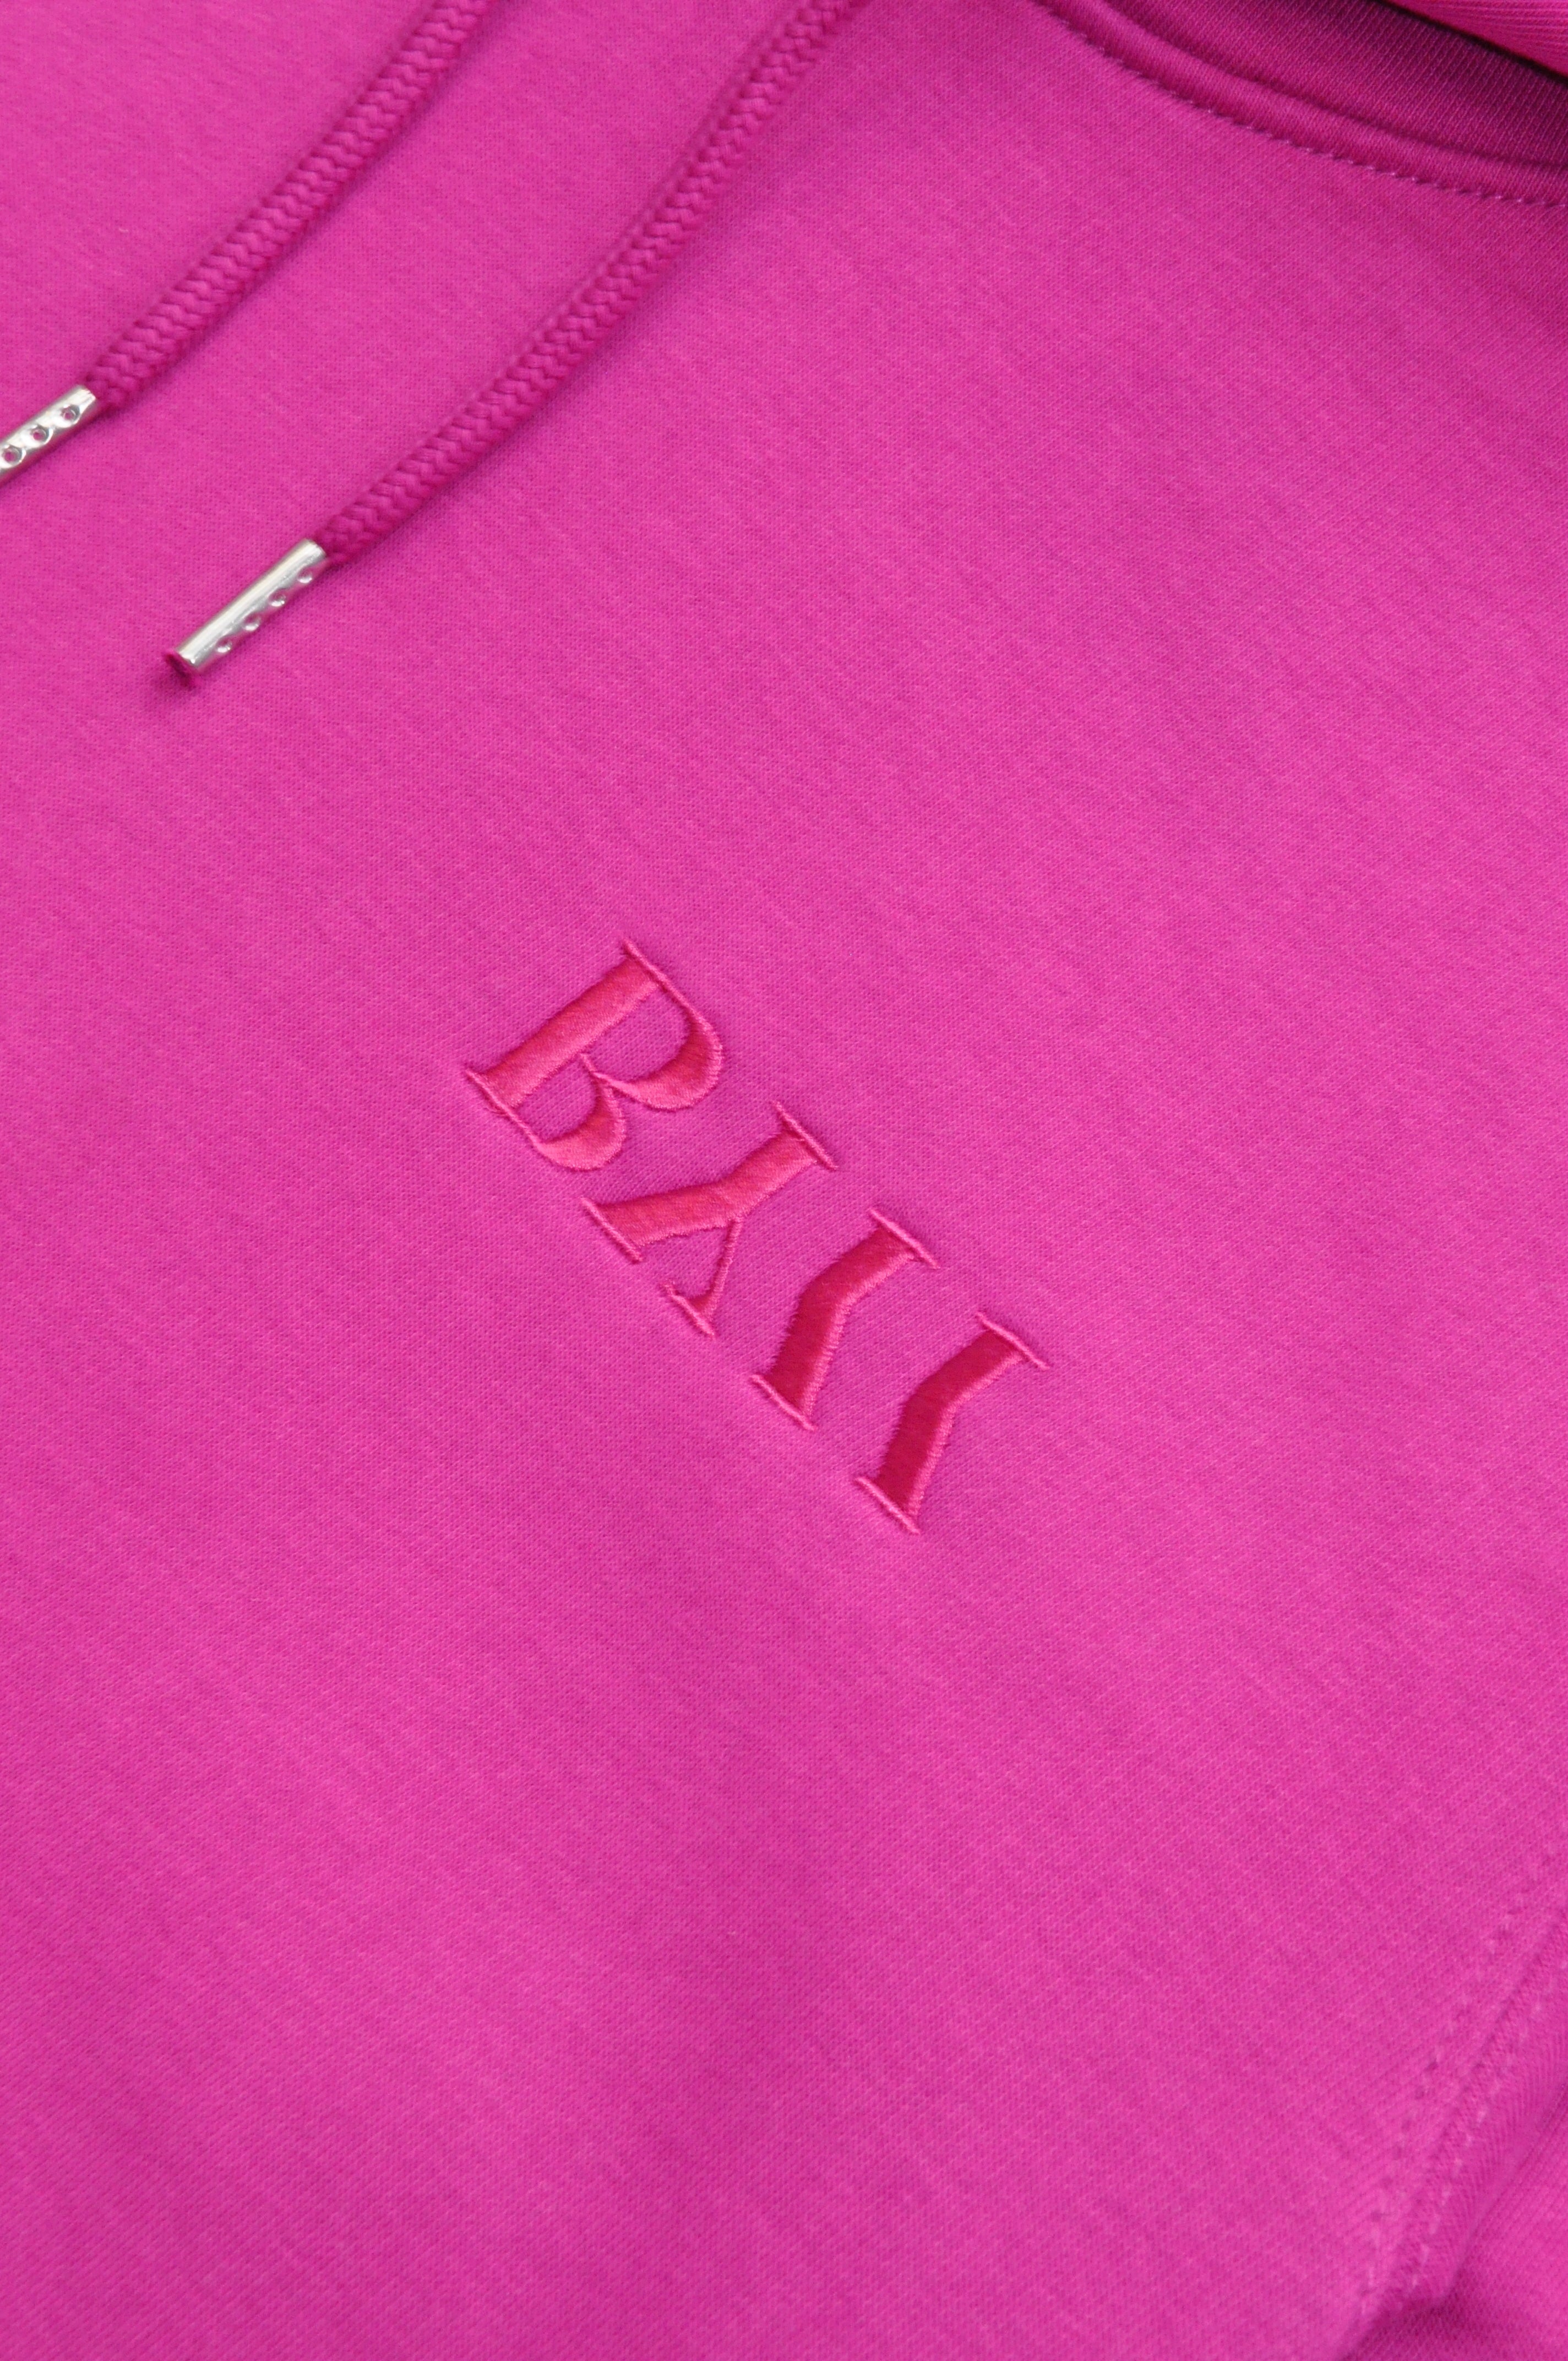 BY11 Organic Cotton Embroidered Logo Hoodie - Raspberry